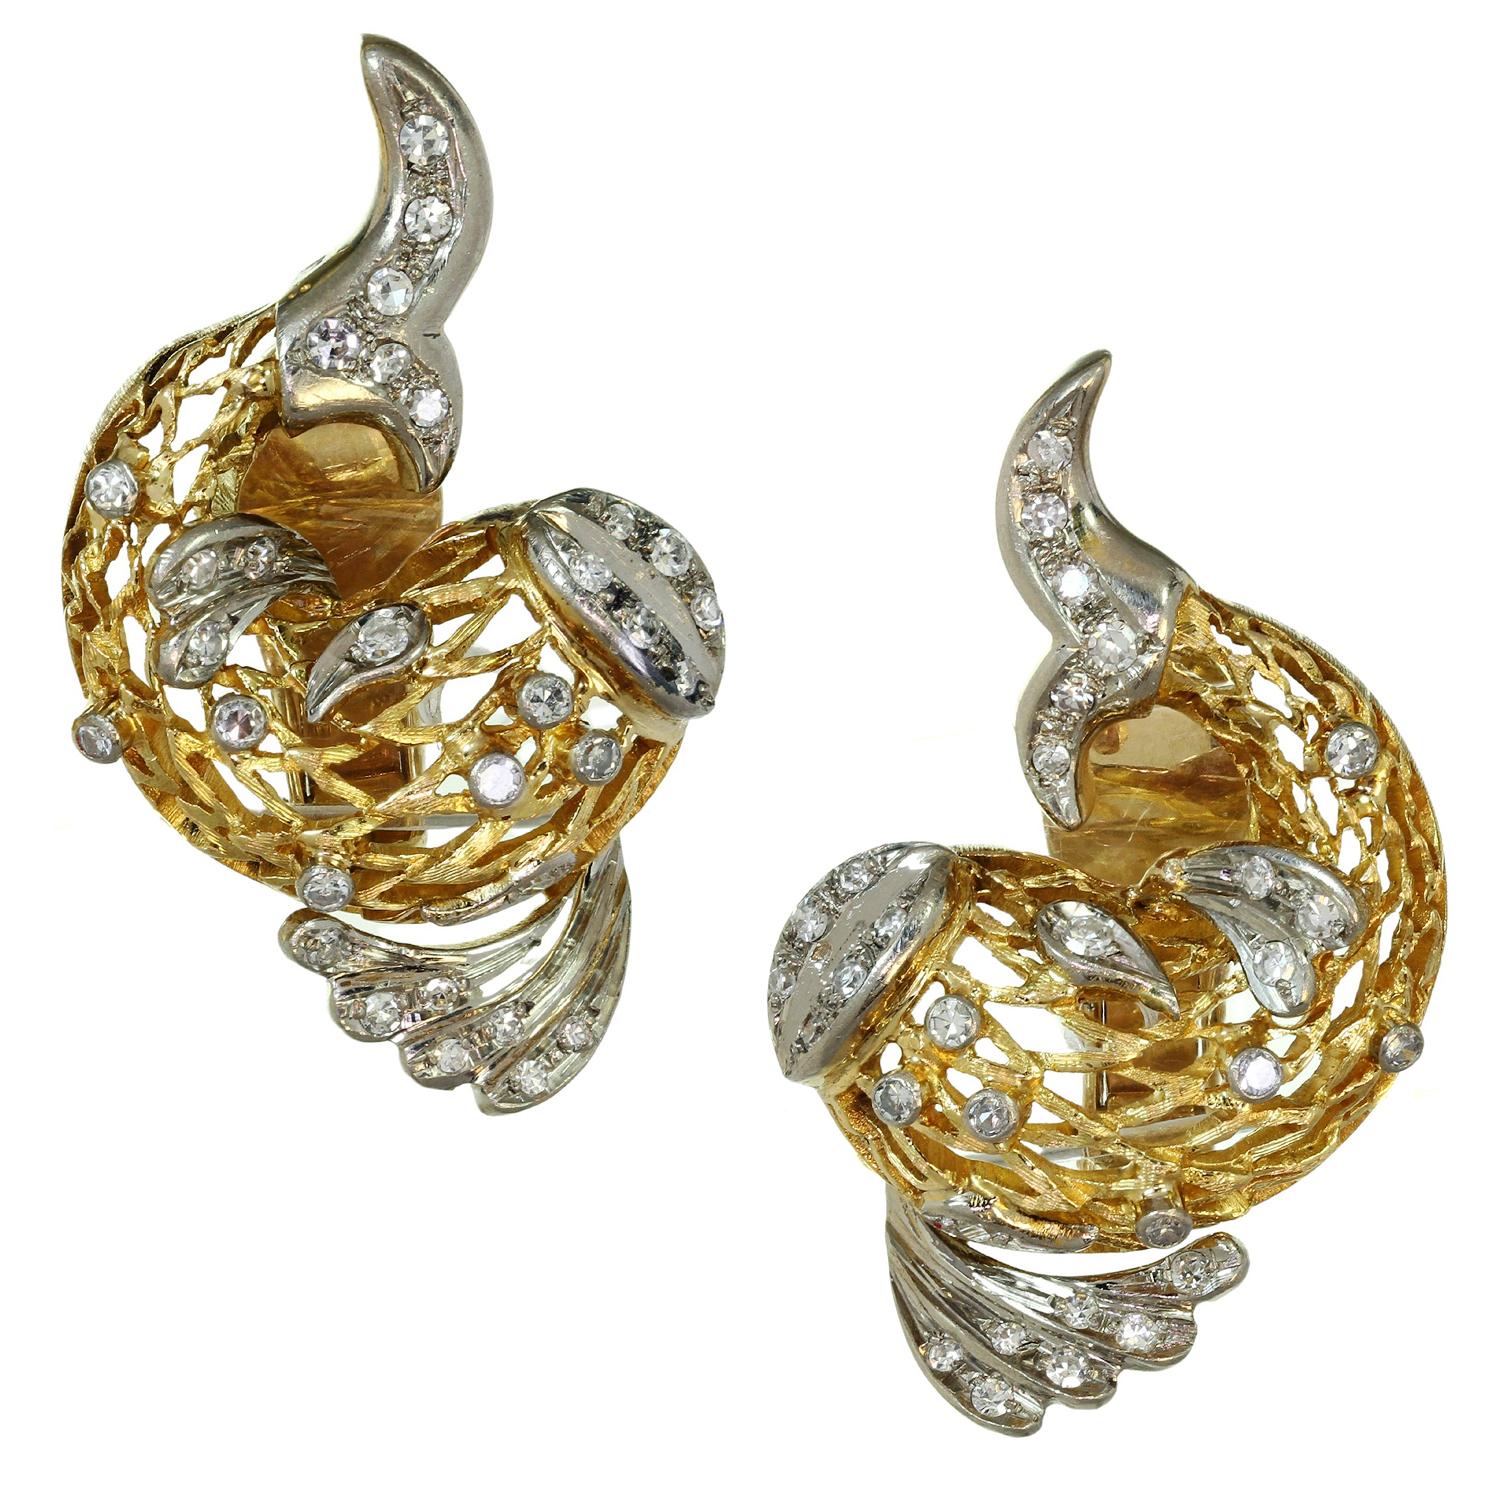 These fabulous Ilias Lalaounis clip-on earrings feature a chic dolphin design crafted in 18k yellow gold, accented with white gold and set with single-cut G-H-I VS1-VS2 round diamonds weighing an estimated 1.0 carats. Signed Ilias Lalaounis, with